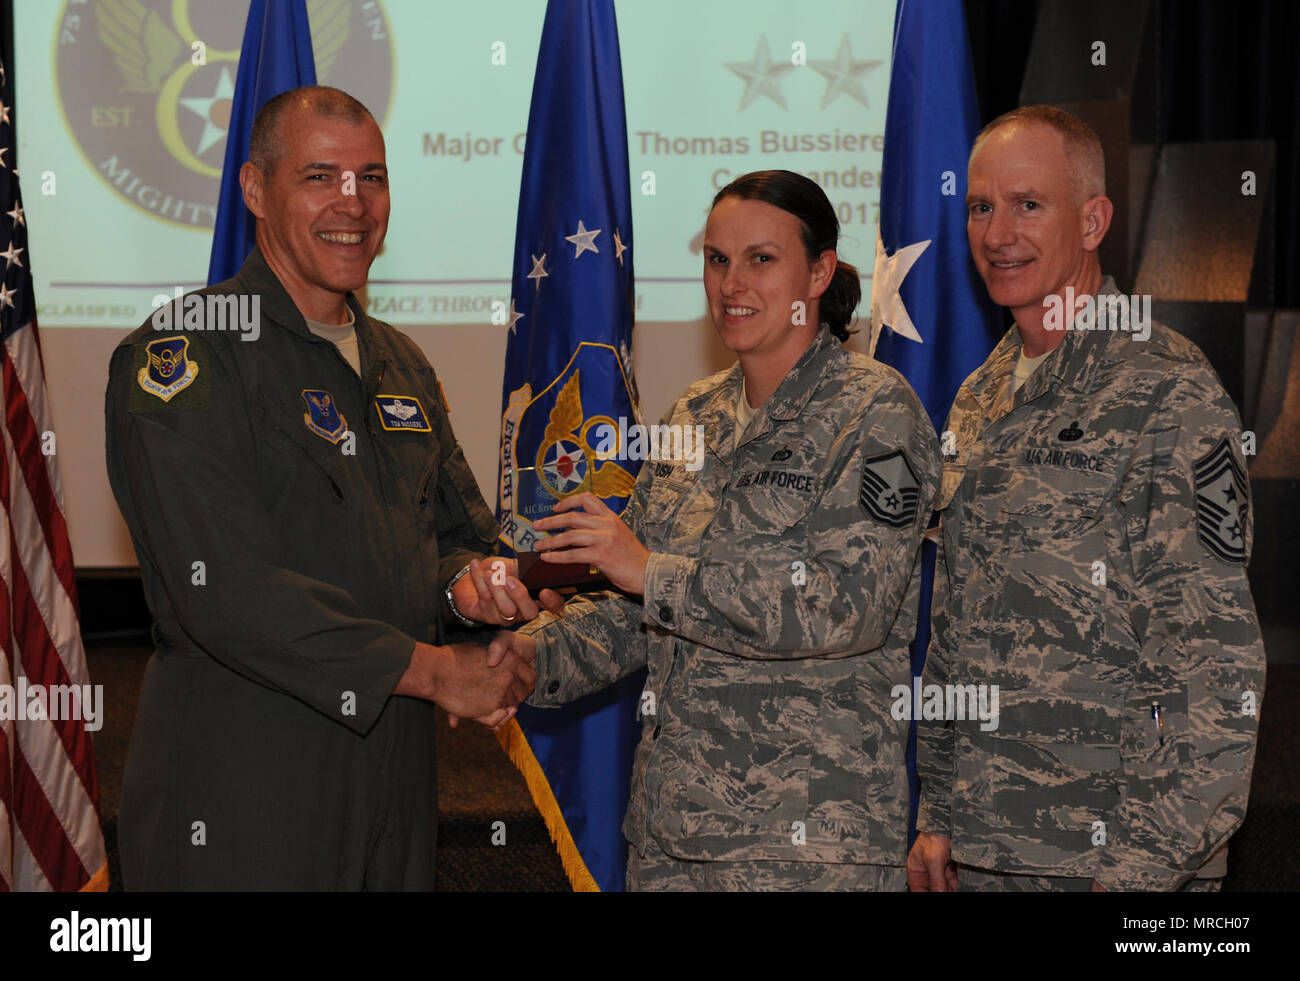 U.S. Air Force Maj. Gen. Thomas Bussiere, Eighth Air Force commander, left, and Chief Master Sgt. Alan Boling, Eighth Air Force command chief, far right, recognizes Airman 1st Class Krystal Cleary, 608th Air Operations Center (not pictured) as a Diamond Sharp Award winner for the month of December during a Headquarters Eighth Air Force commanders call at Barksdale Air Force Base, La., April 12, 2017. Various topics pertinent to the organization were discussed throughout the event, followed by a question and answer engagement session with the Airmen. Stock Photo